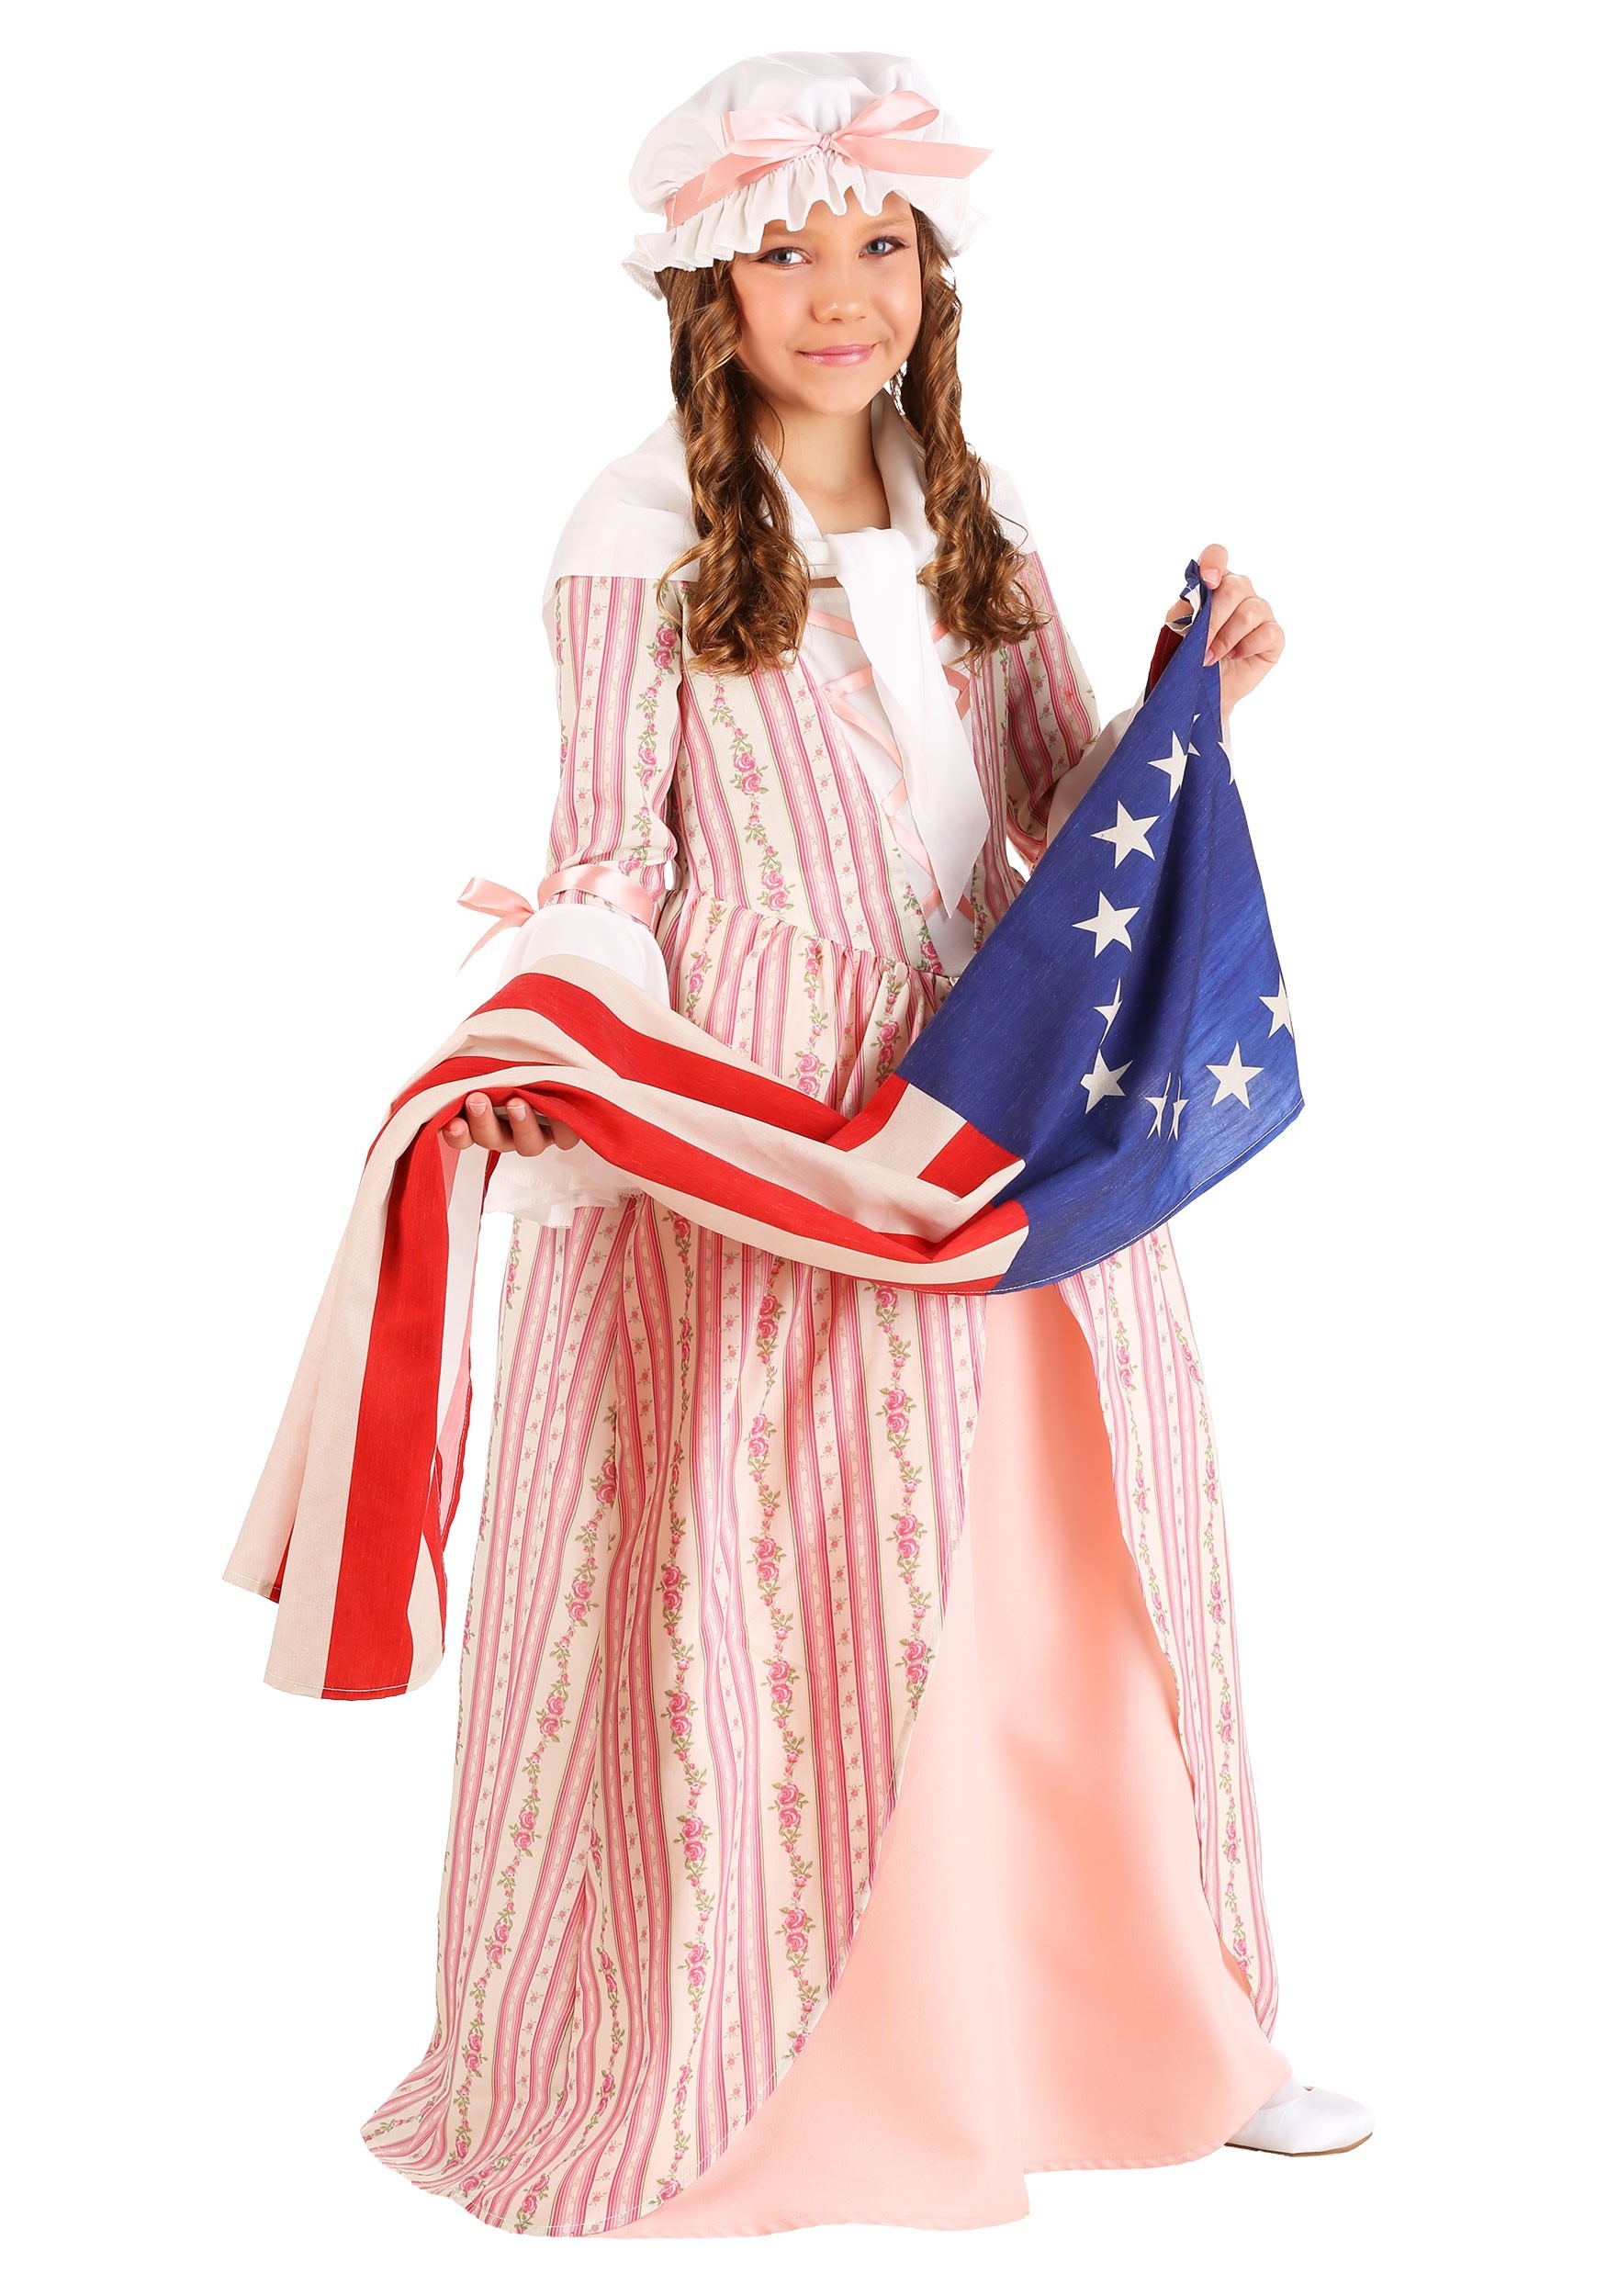 Photos - Fancy Dress ROSS FUN Costumes Betsy  Girl's Costume Dress | Kid's Historical Costumes P 